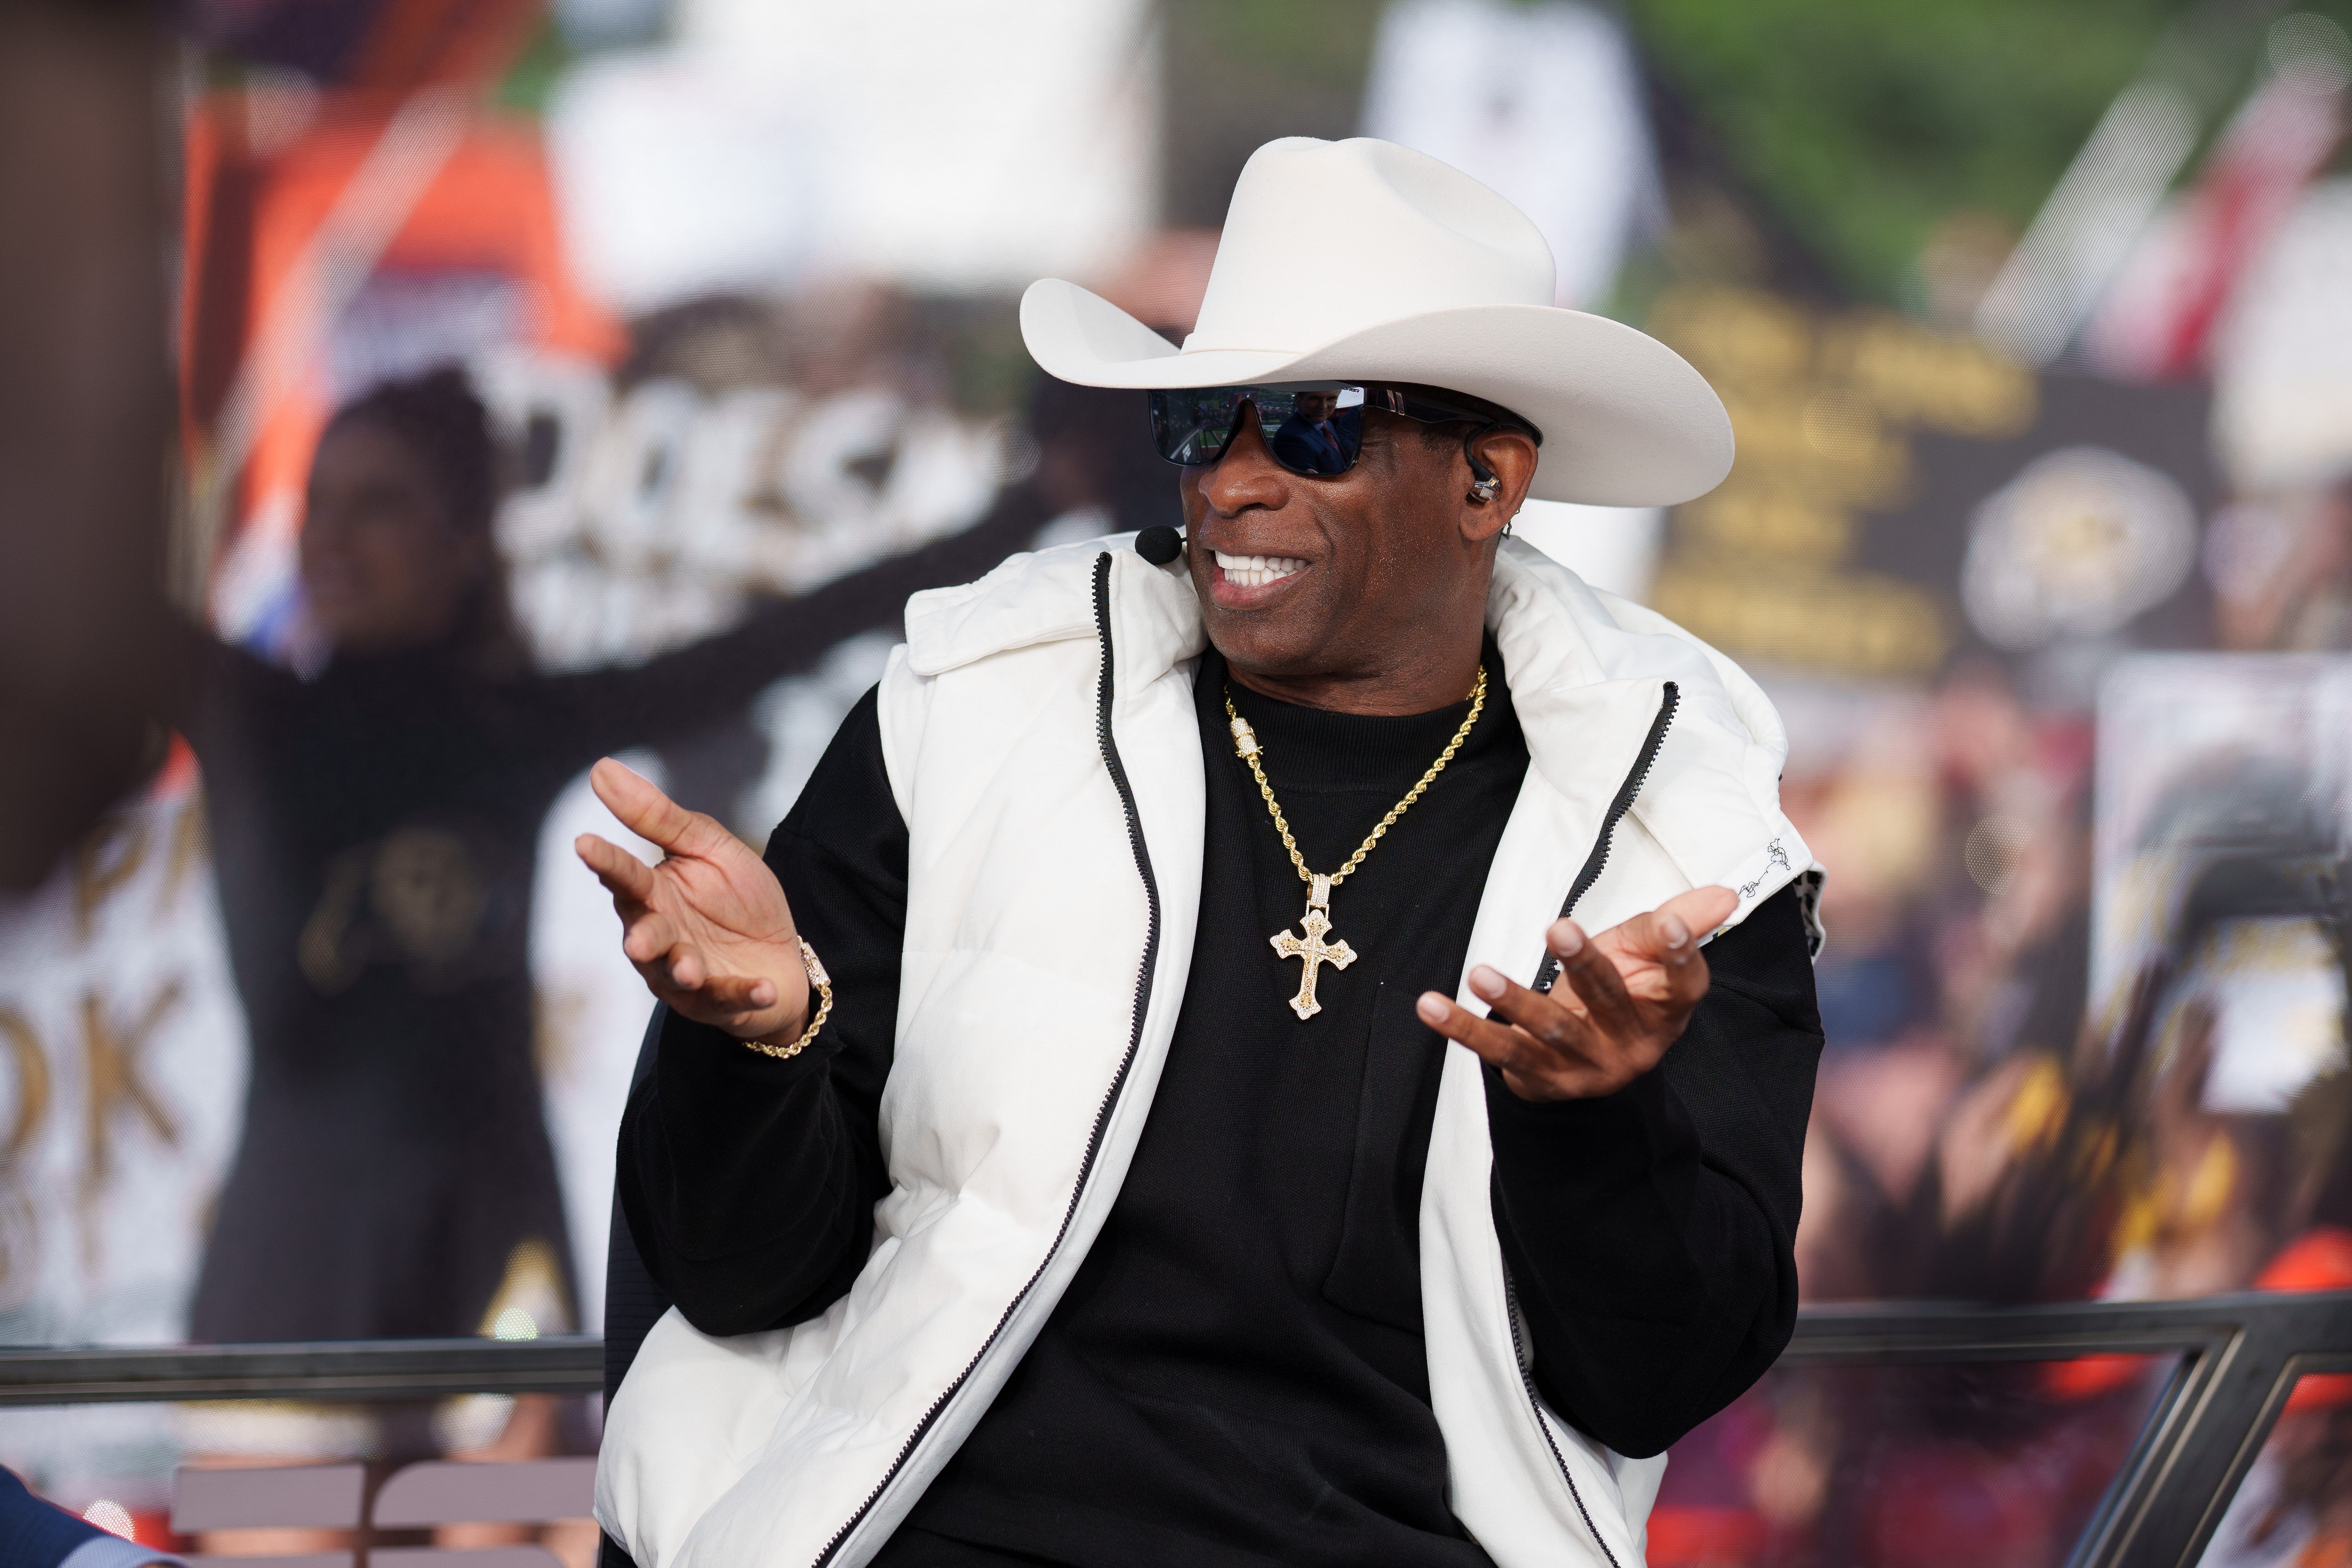 10 things to know about Colorado coach Deion Sanders, former Cowboys star